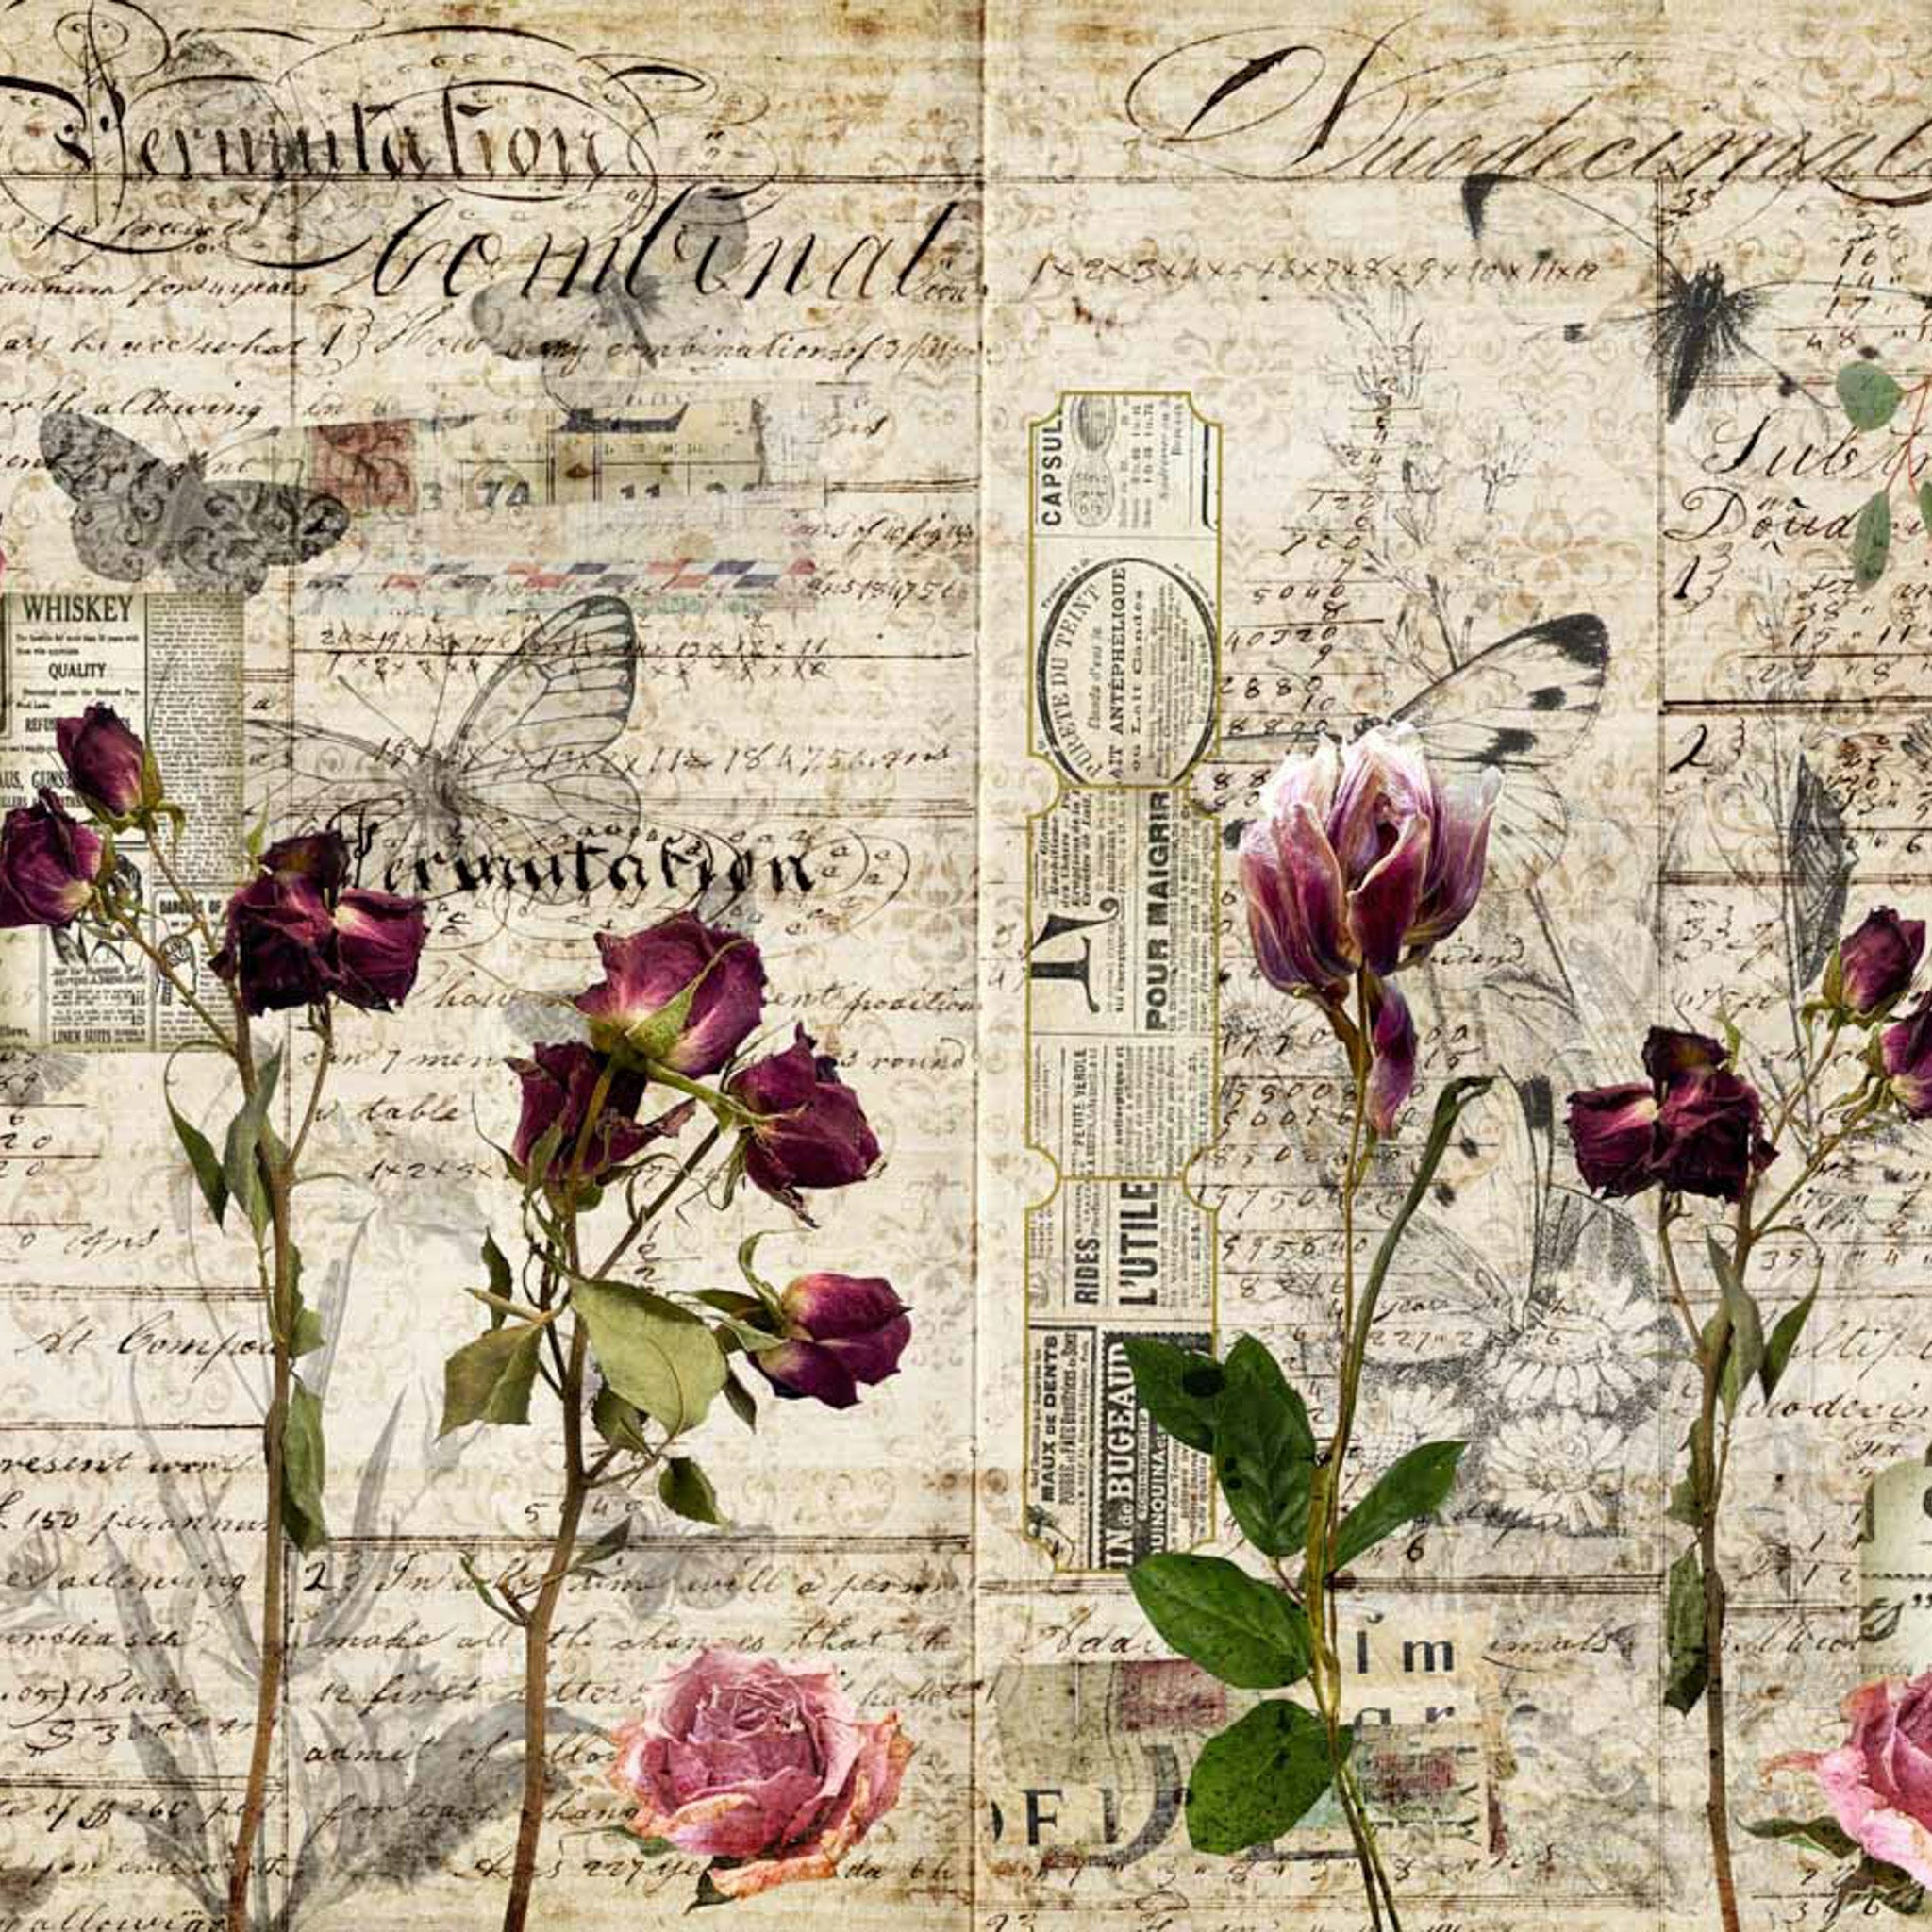 A3 rice paper design of pressed flowers against a collage of vintage magazine clippings and letters.